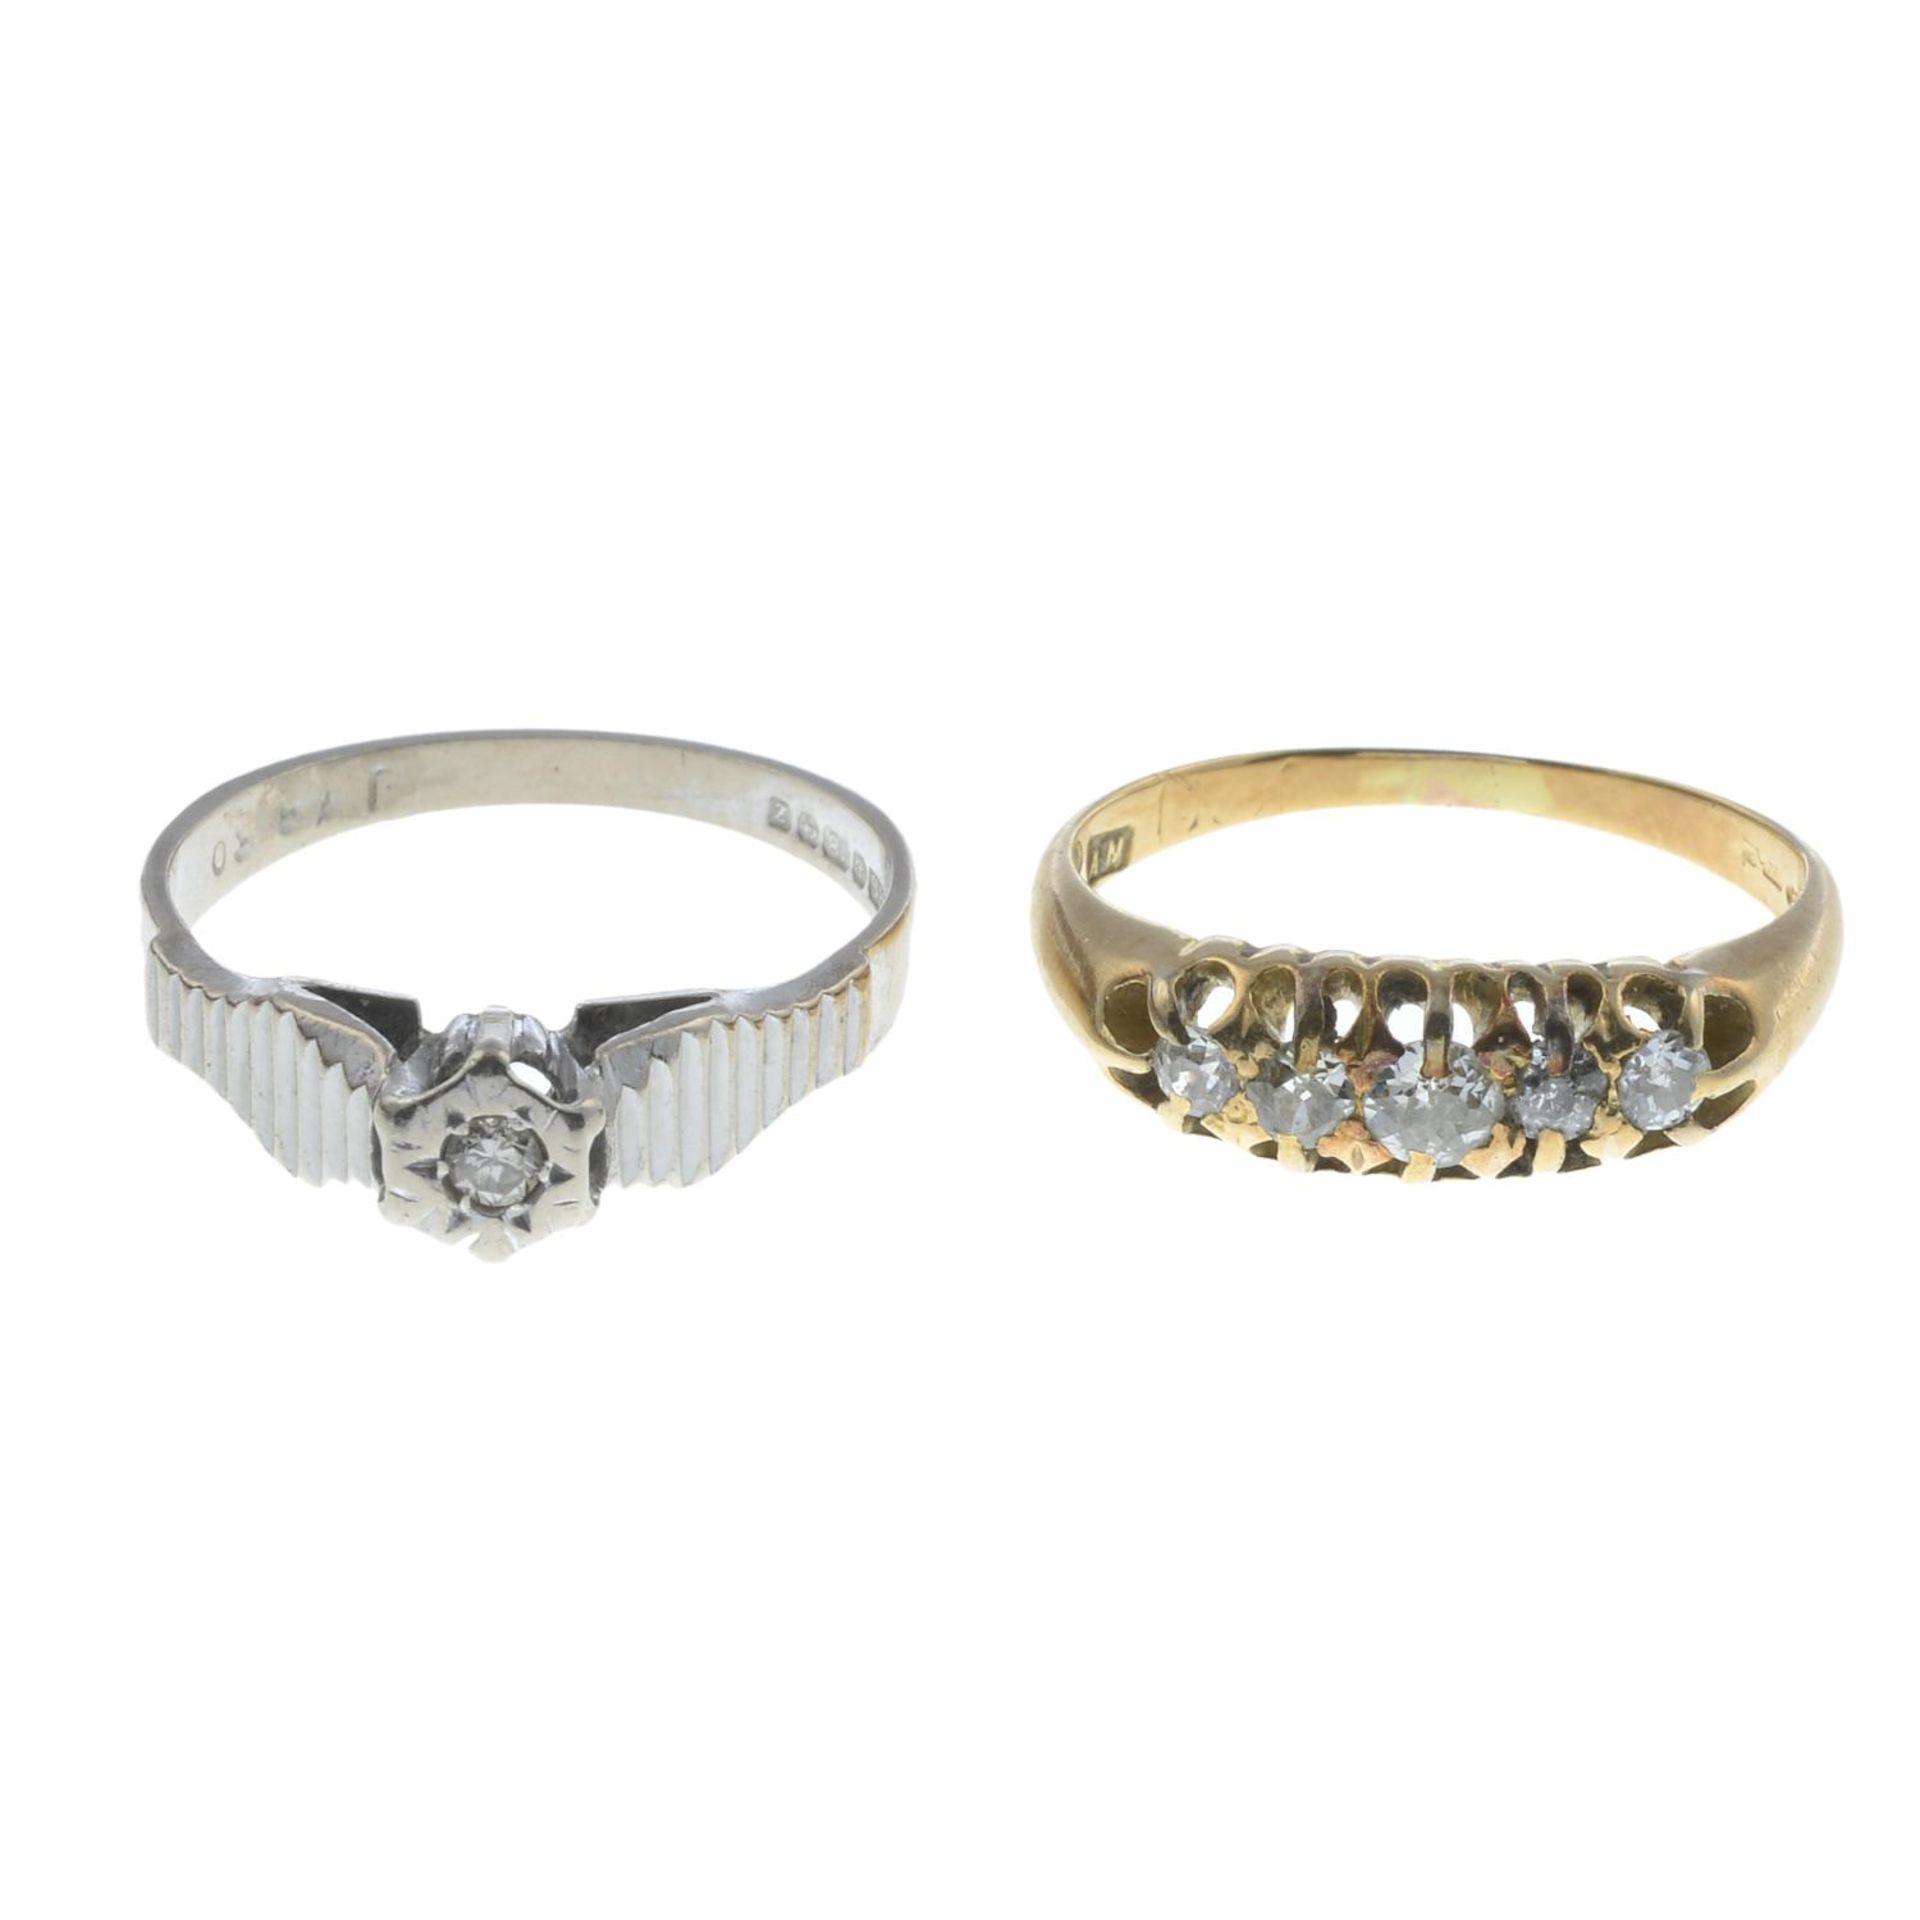 18ct gold diamond single-stone ring, hallmarks for 18ct gold, ring size M1/2, 3.3gms.